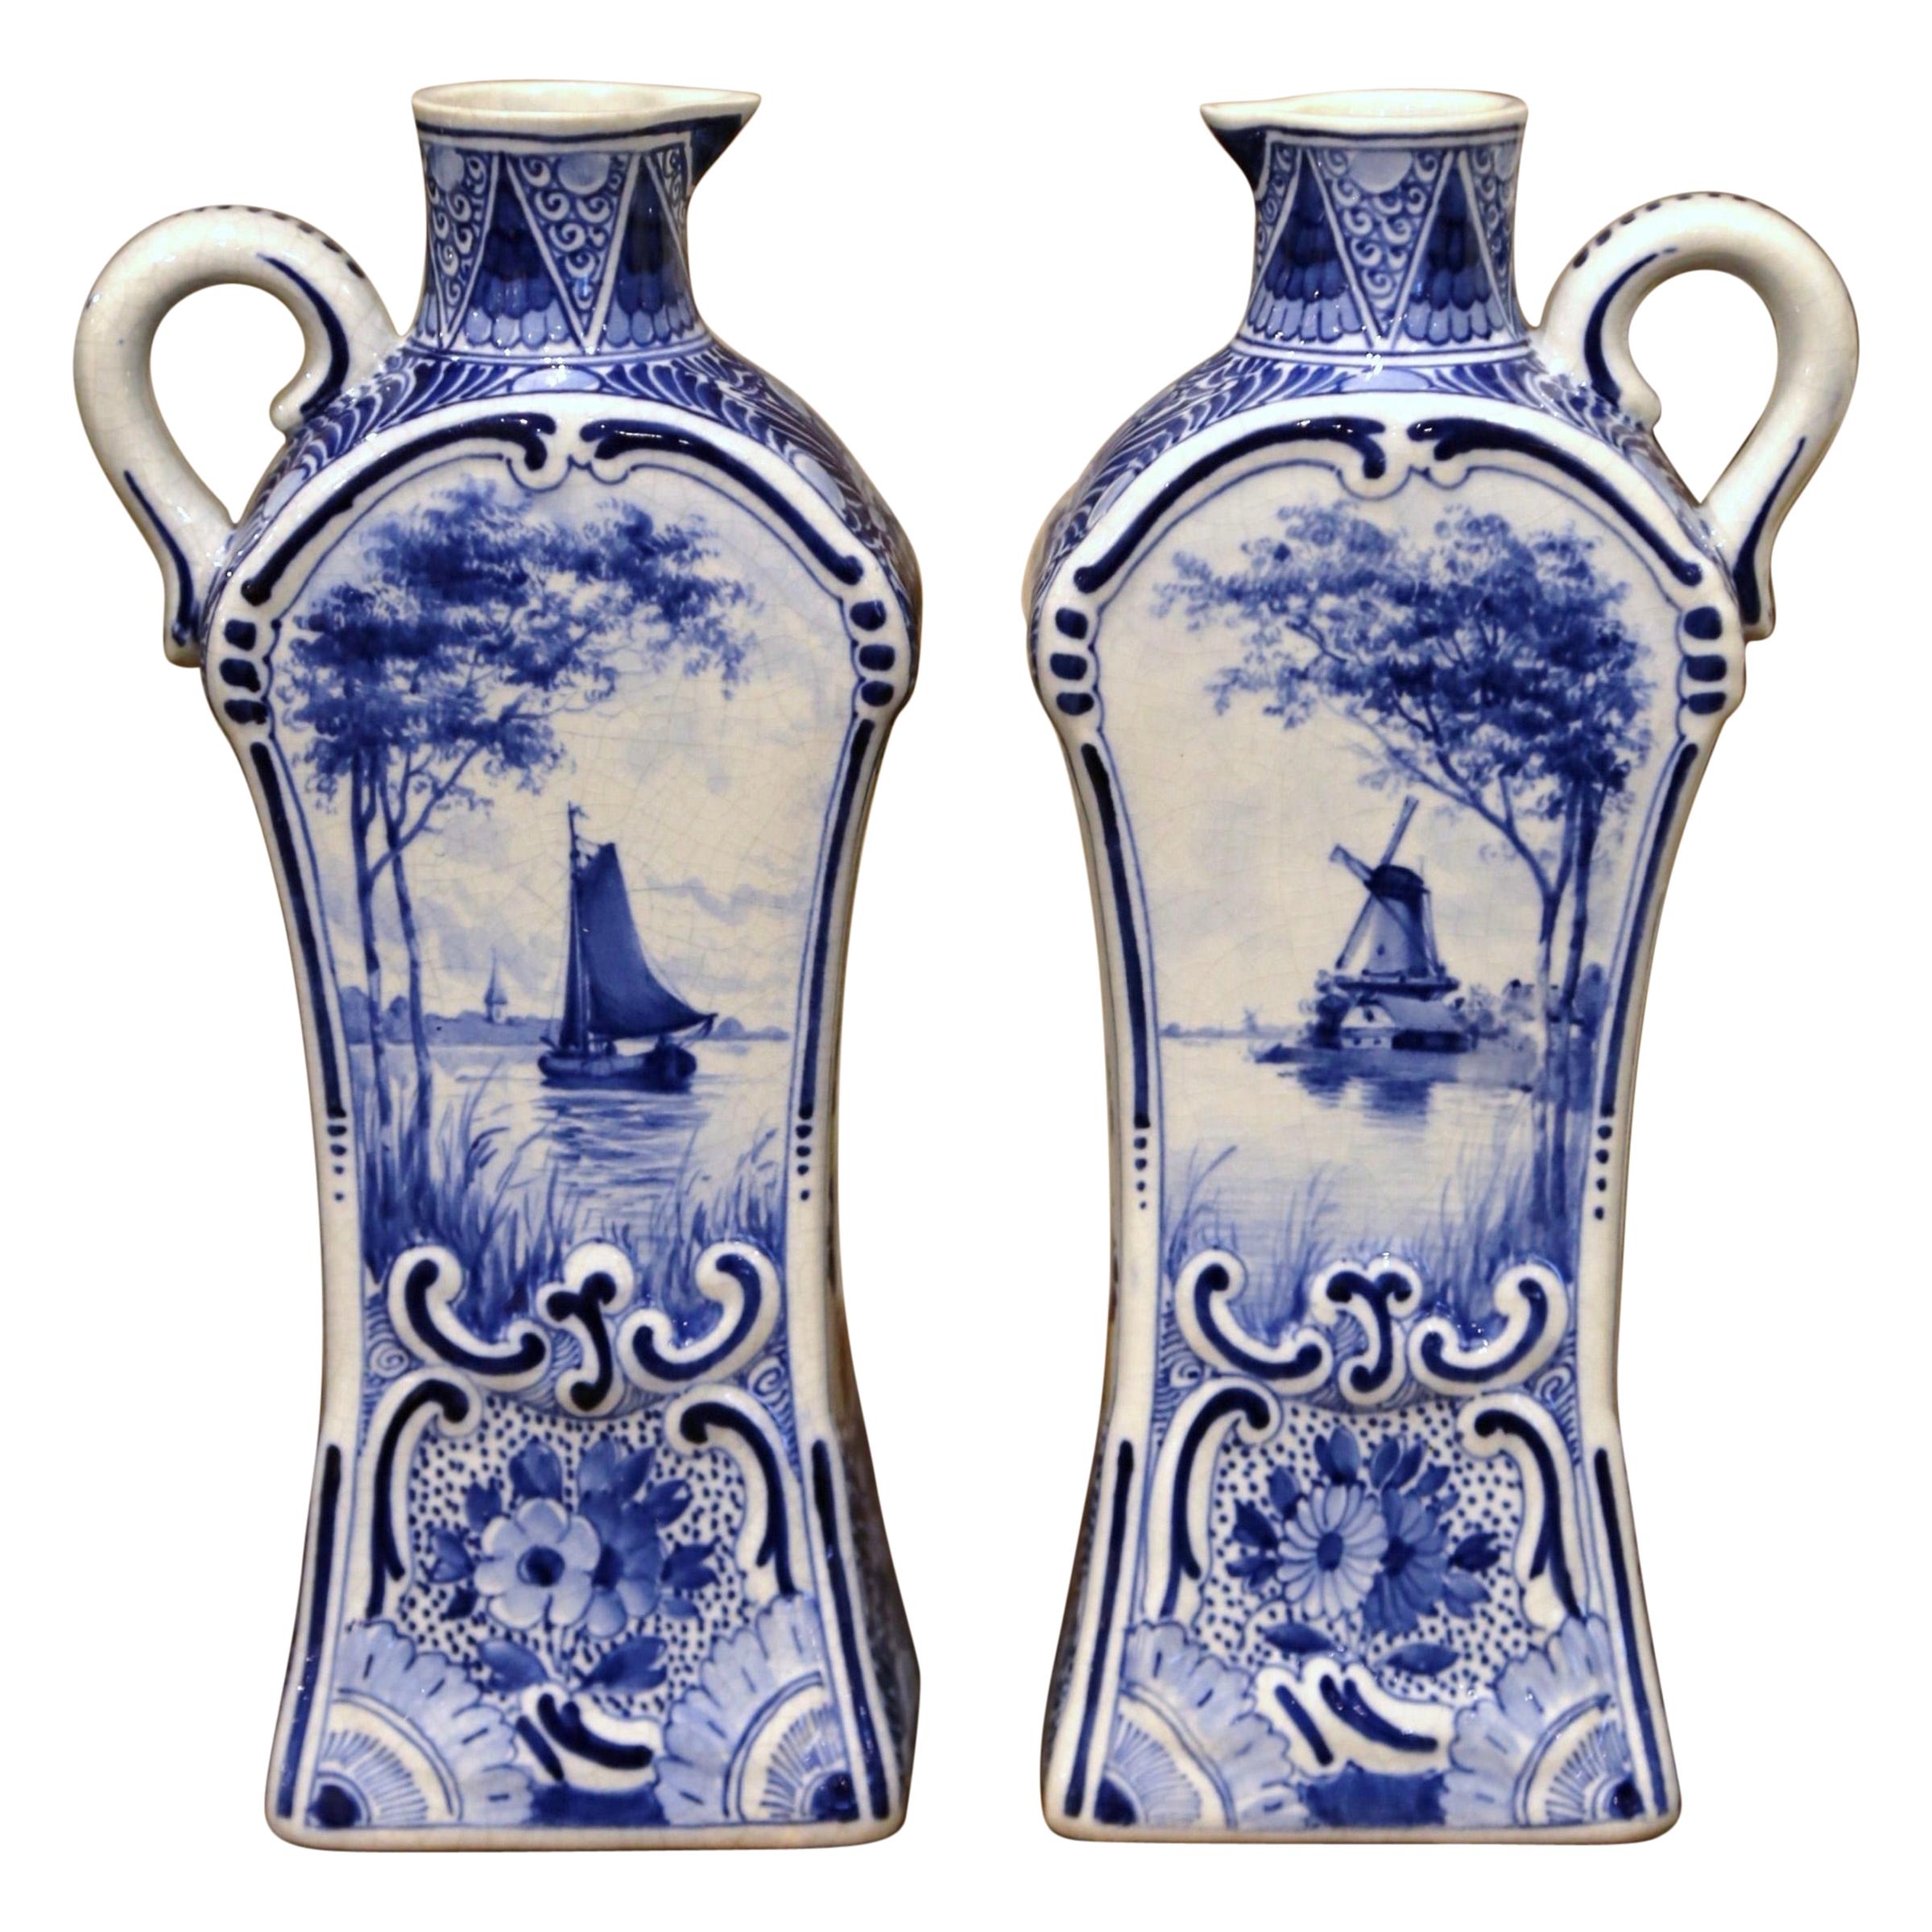 Pair of Early 20th Century Dutch Painted Faience Delft Oil or Vinegar Bottles For Sale